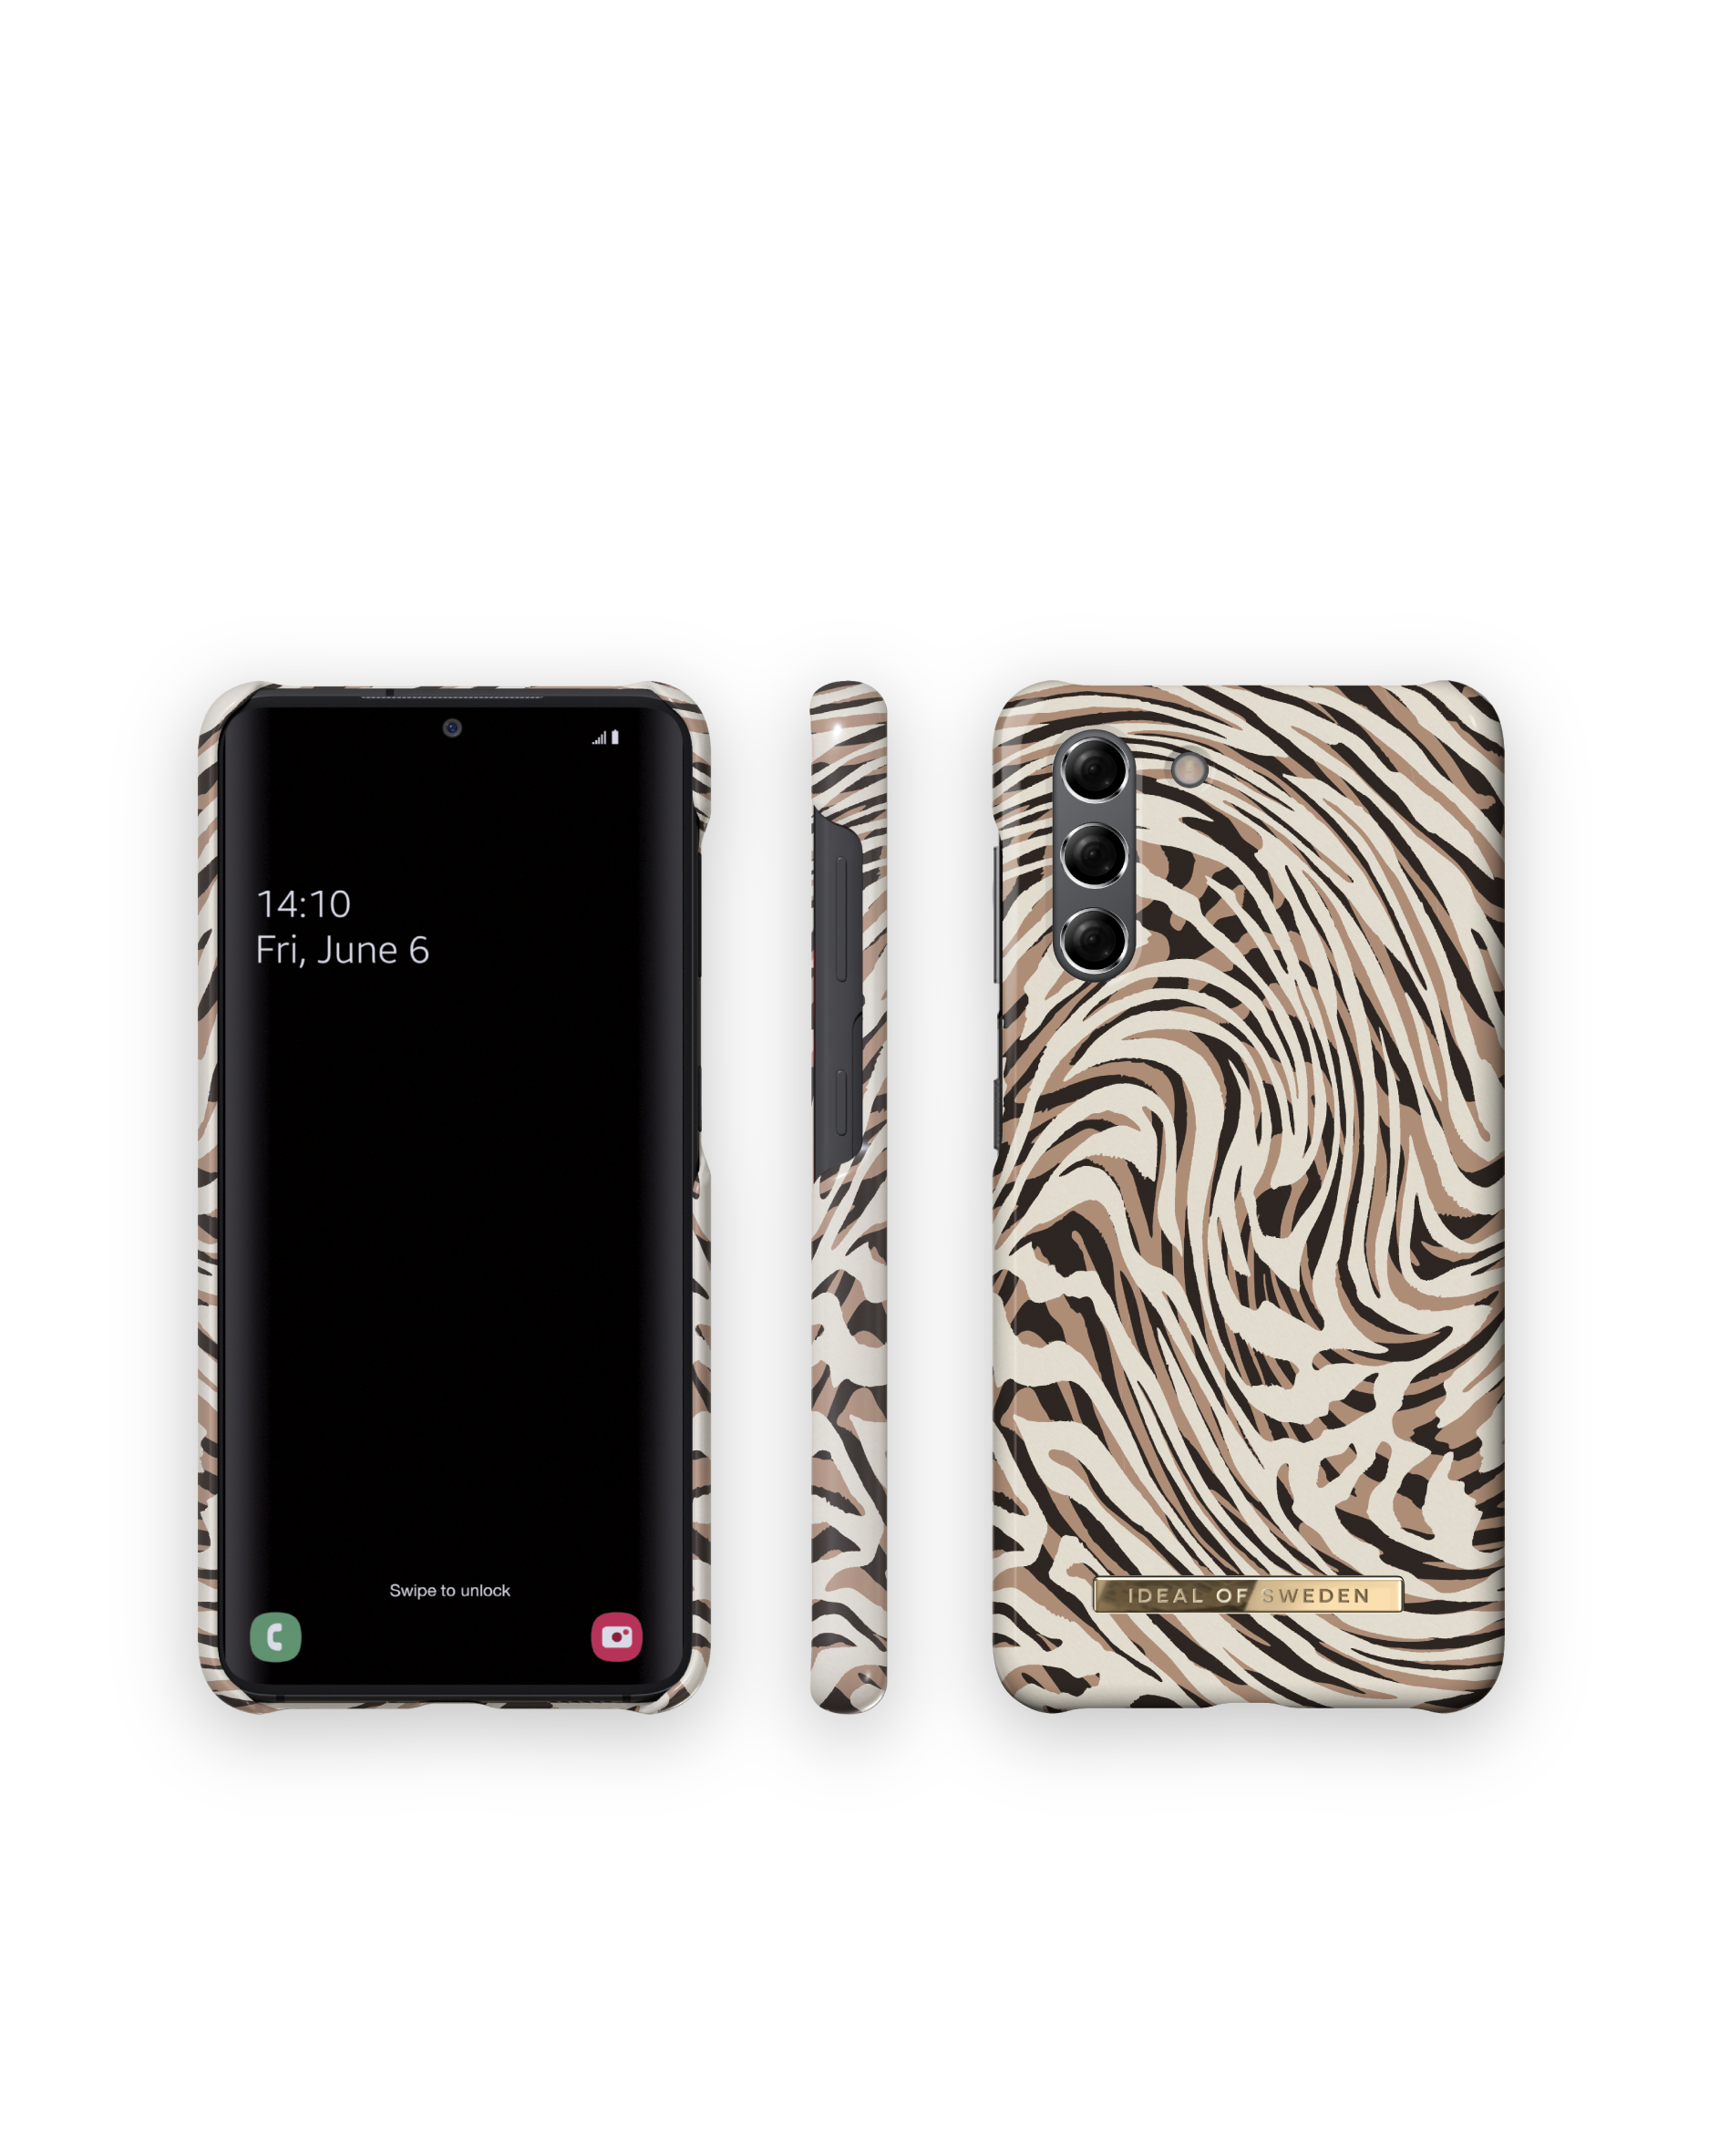 OF Backcover, IDFCSS22-S21-392, IDEAL Hypnotic SWEDEN Galaxy S21, Zebra Samsung,